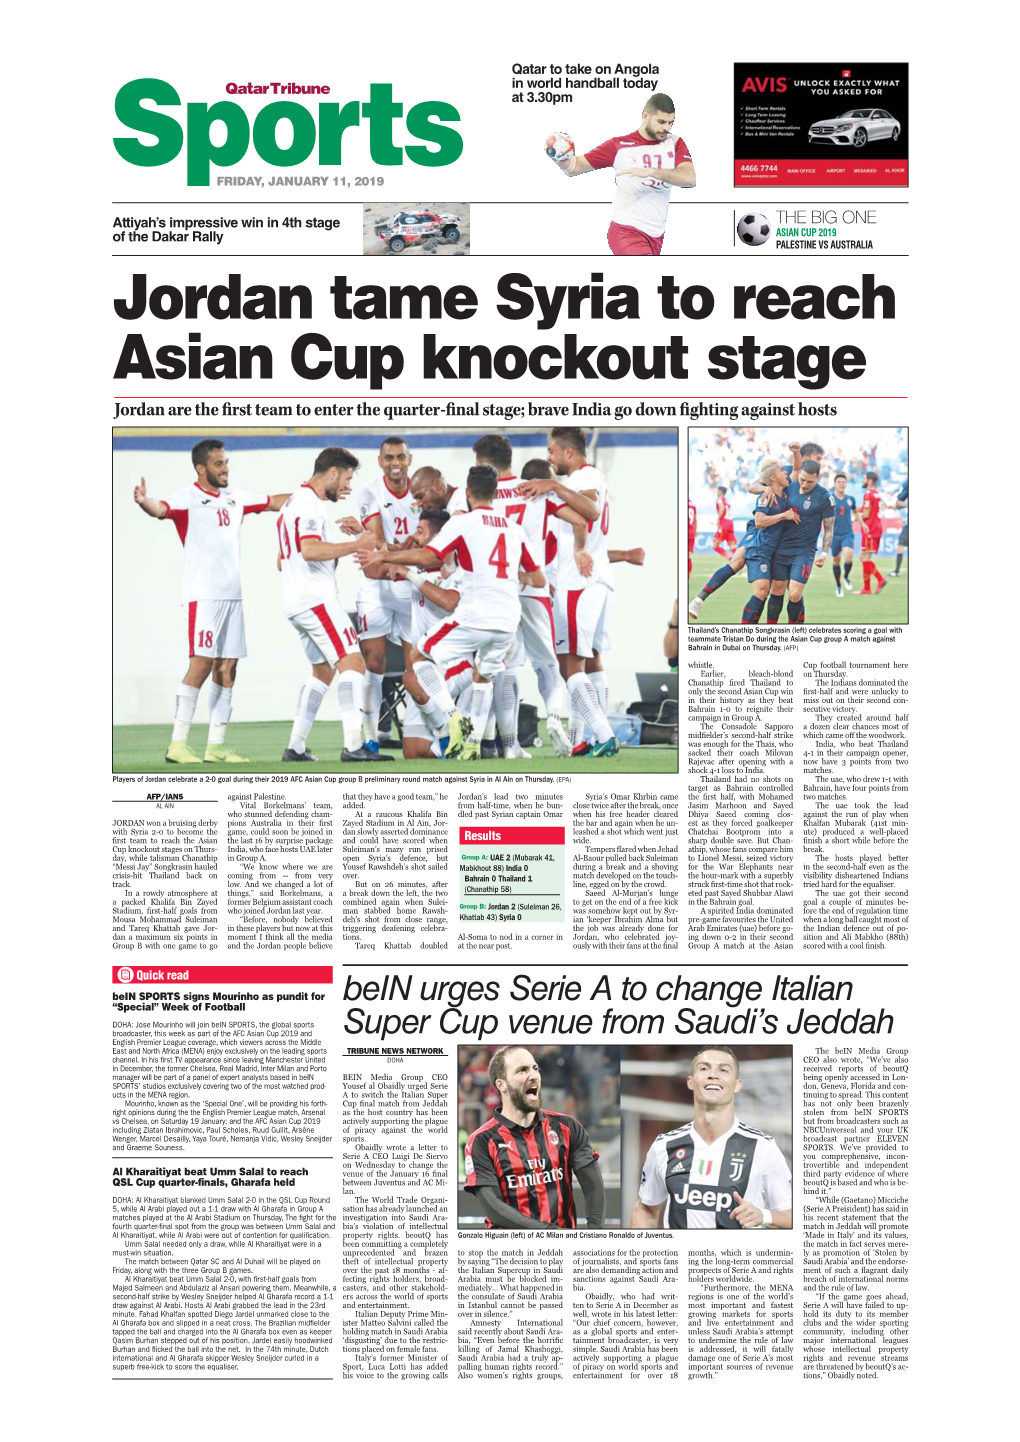 Jordan Tame Syria to Reach Asian Cup Knockout Stage Jordan Are the First Team to Enter the Quarter-Final Stage; Brave India Go Down Fighting Against Hosts